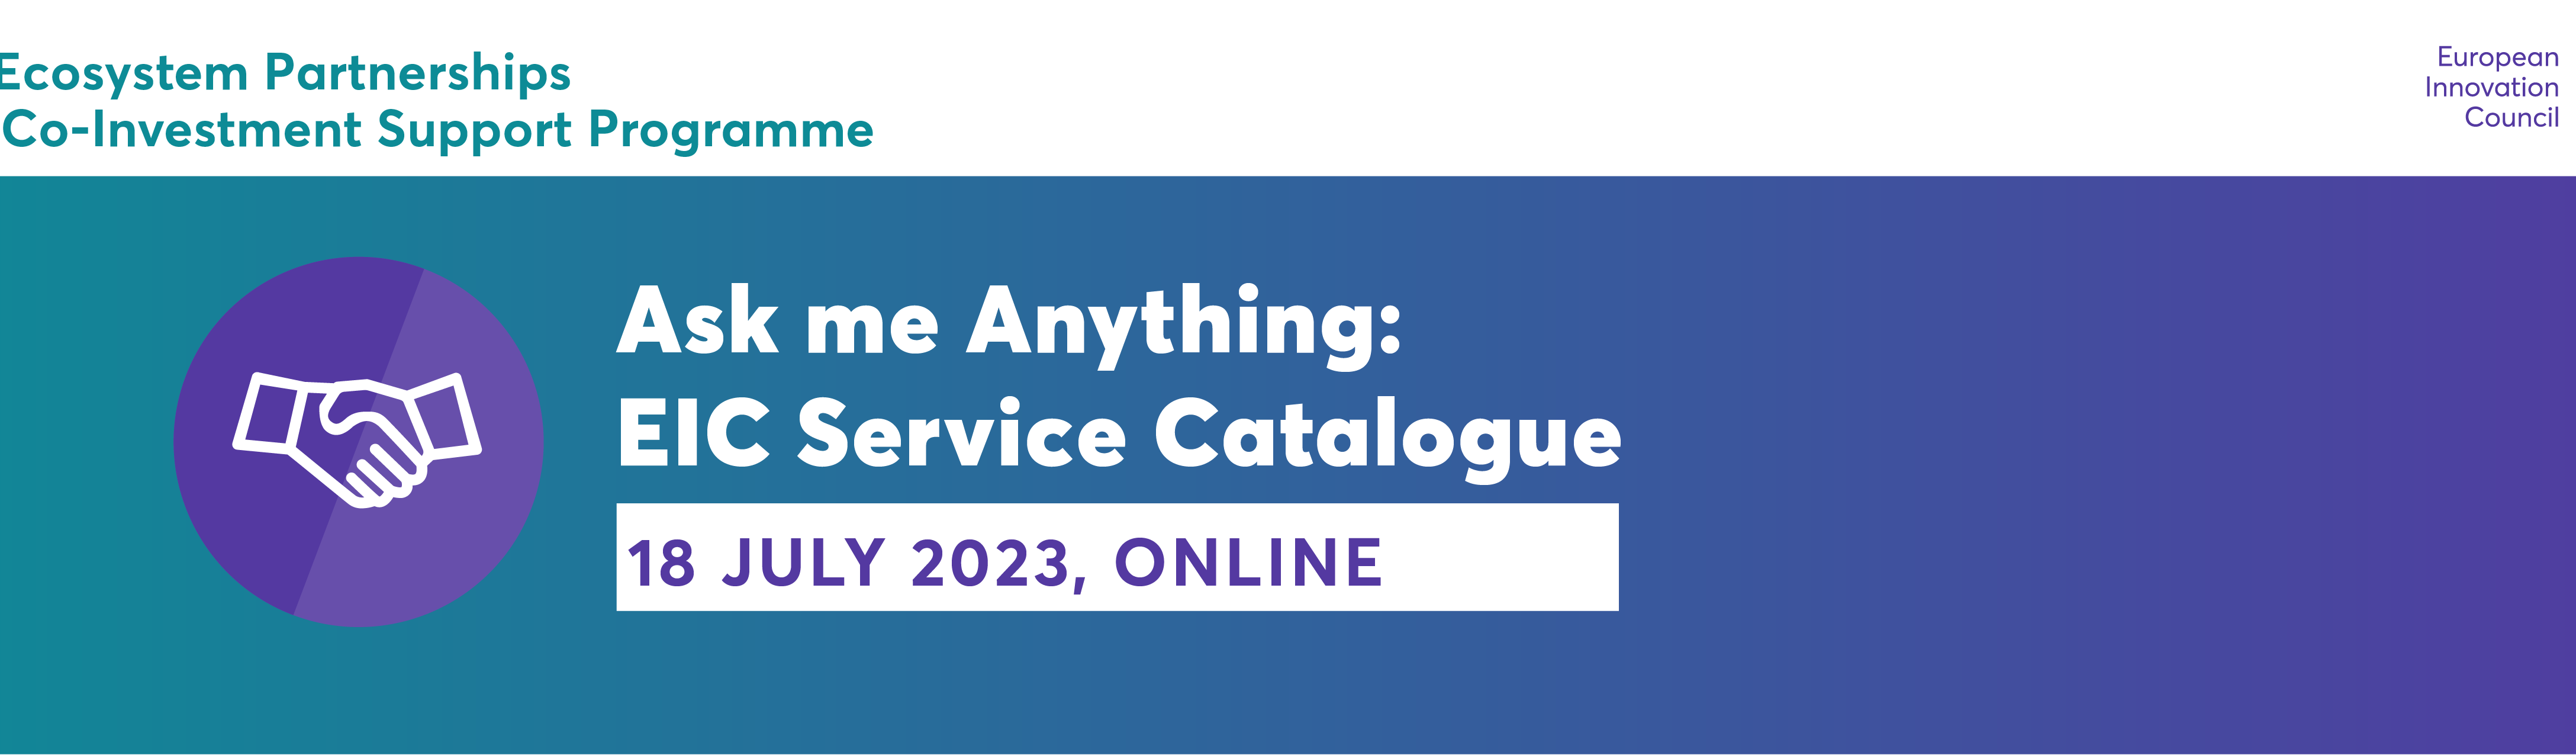 Ask me Anything: EIC Service Catalogue